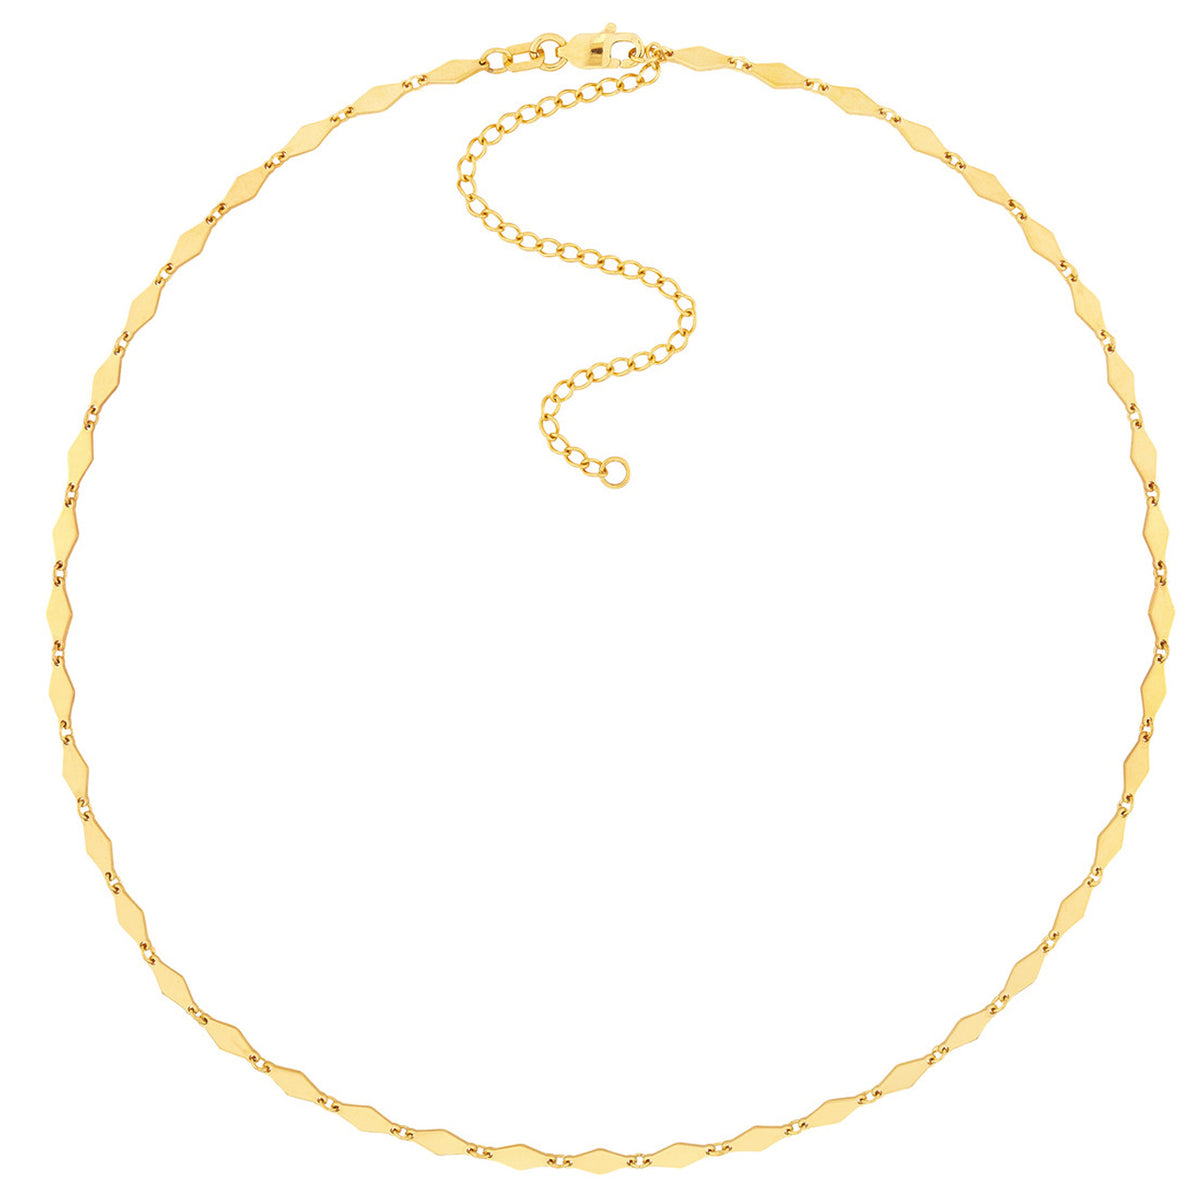 14K Gold Mirror Diamond Shape Link Choker Chain Necklace with Lobster Lock, 16"